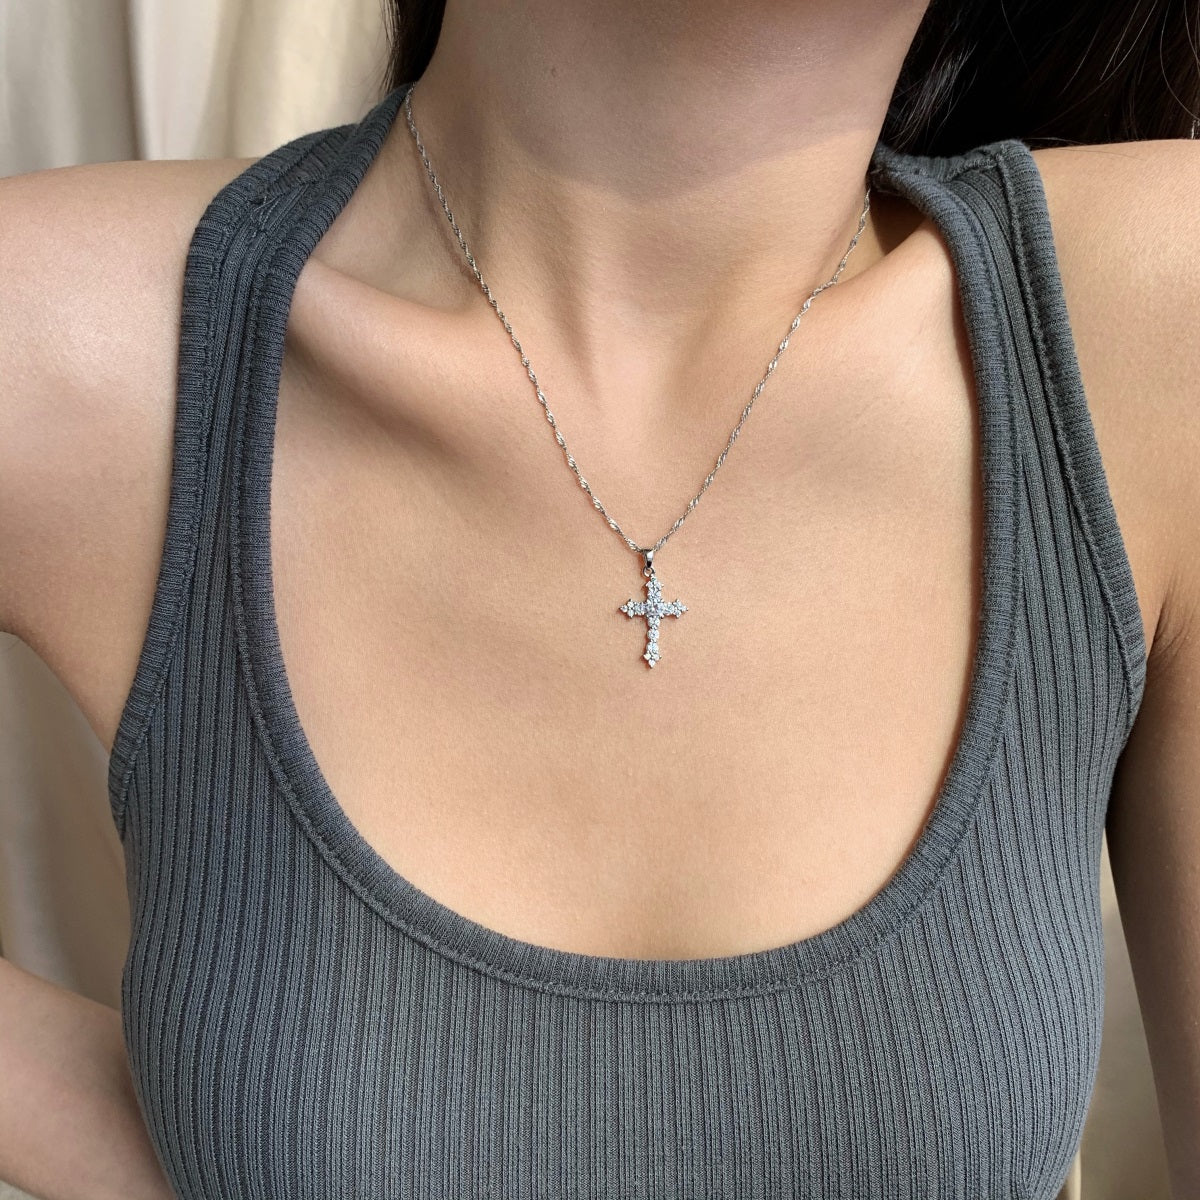 Silver Latest Cross Design Pendant With Link Chain